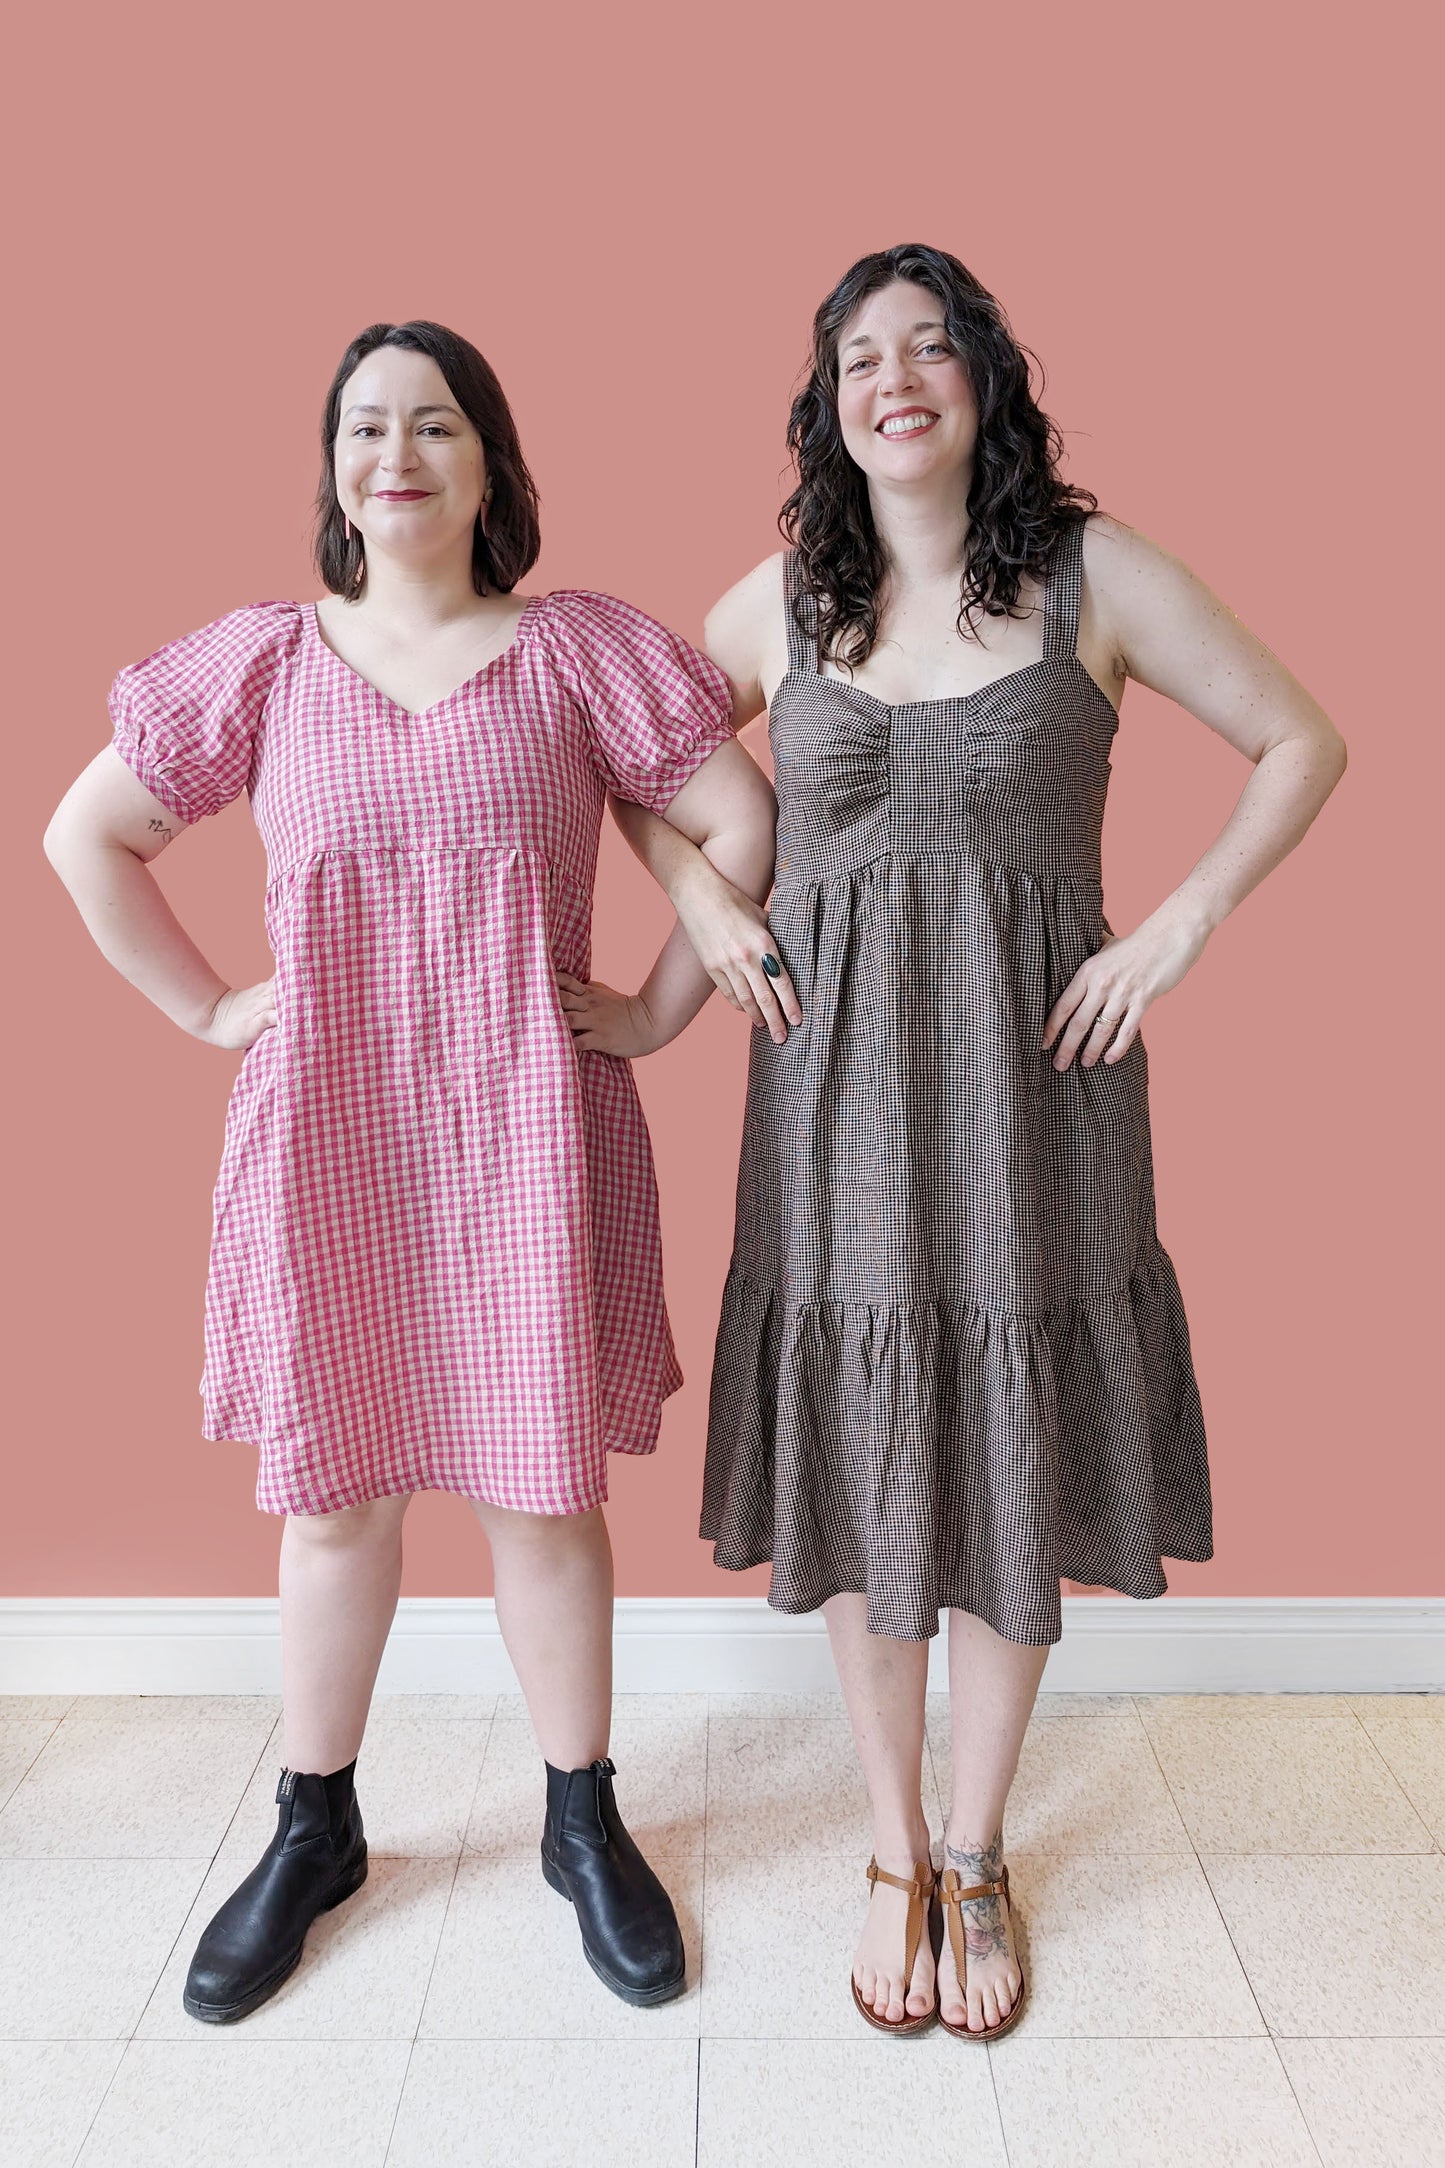 Calista Dress by Allison Wonderland, Black//Mocha Gingham, wide straps, sweetheart neckline, gathers at bust and waist, ruffled hem, pockets, 100% linen, sizes 2-12, made in Vancouver